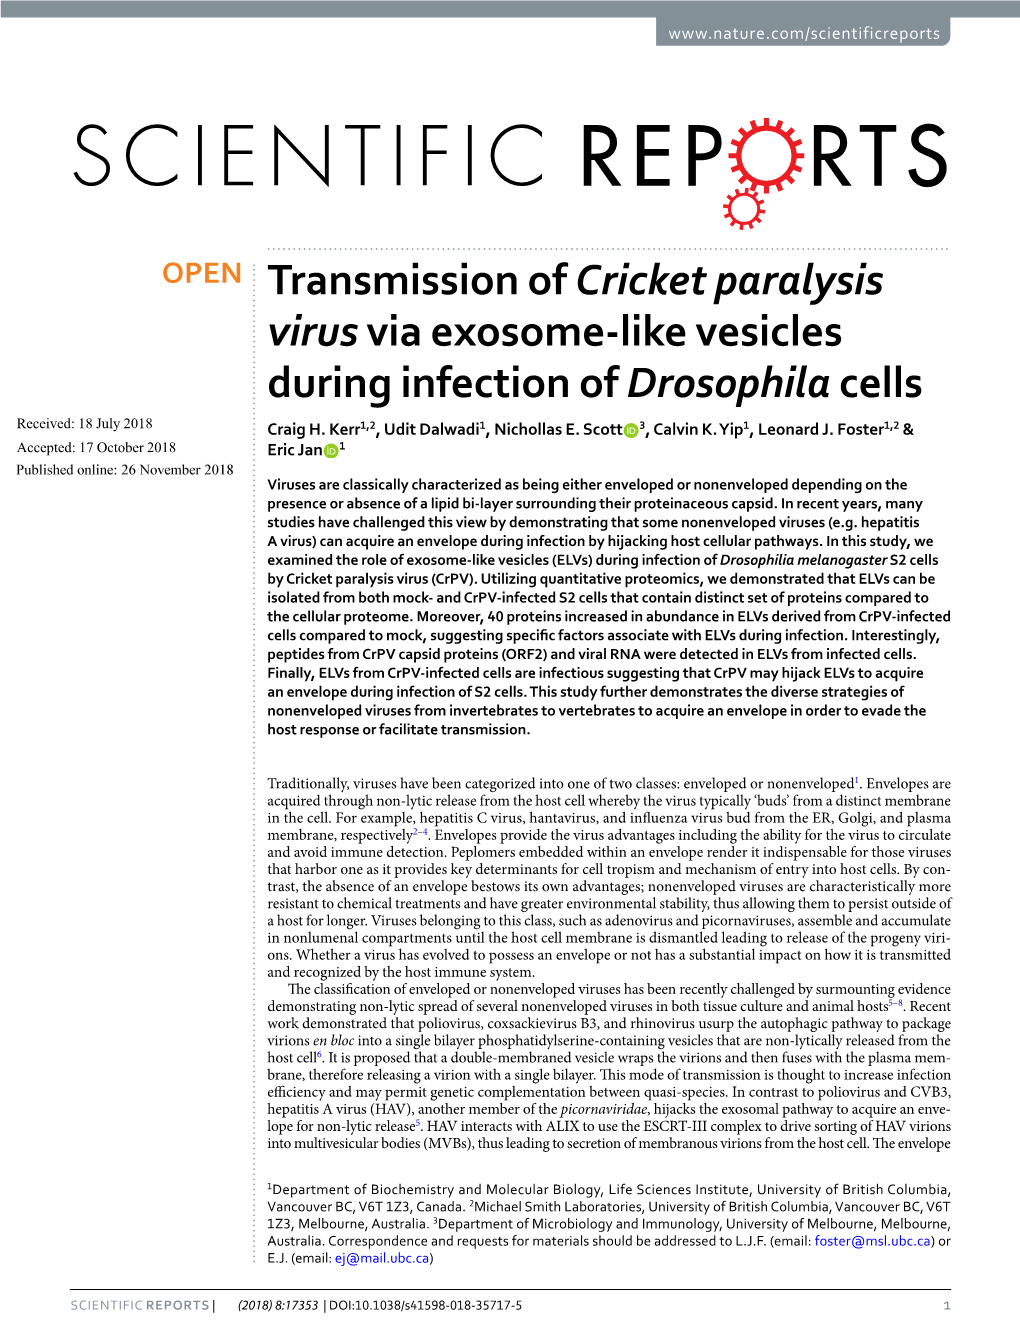 Transmission of Cricket Paralysis Virus Via Exosome-Like Vesicles During Infection of Drosophila Cells Received: 18 July 2018 Craig H